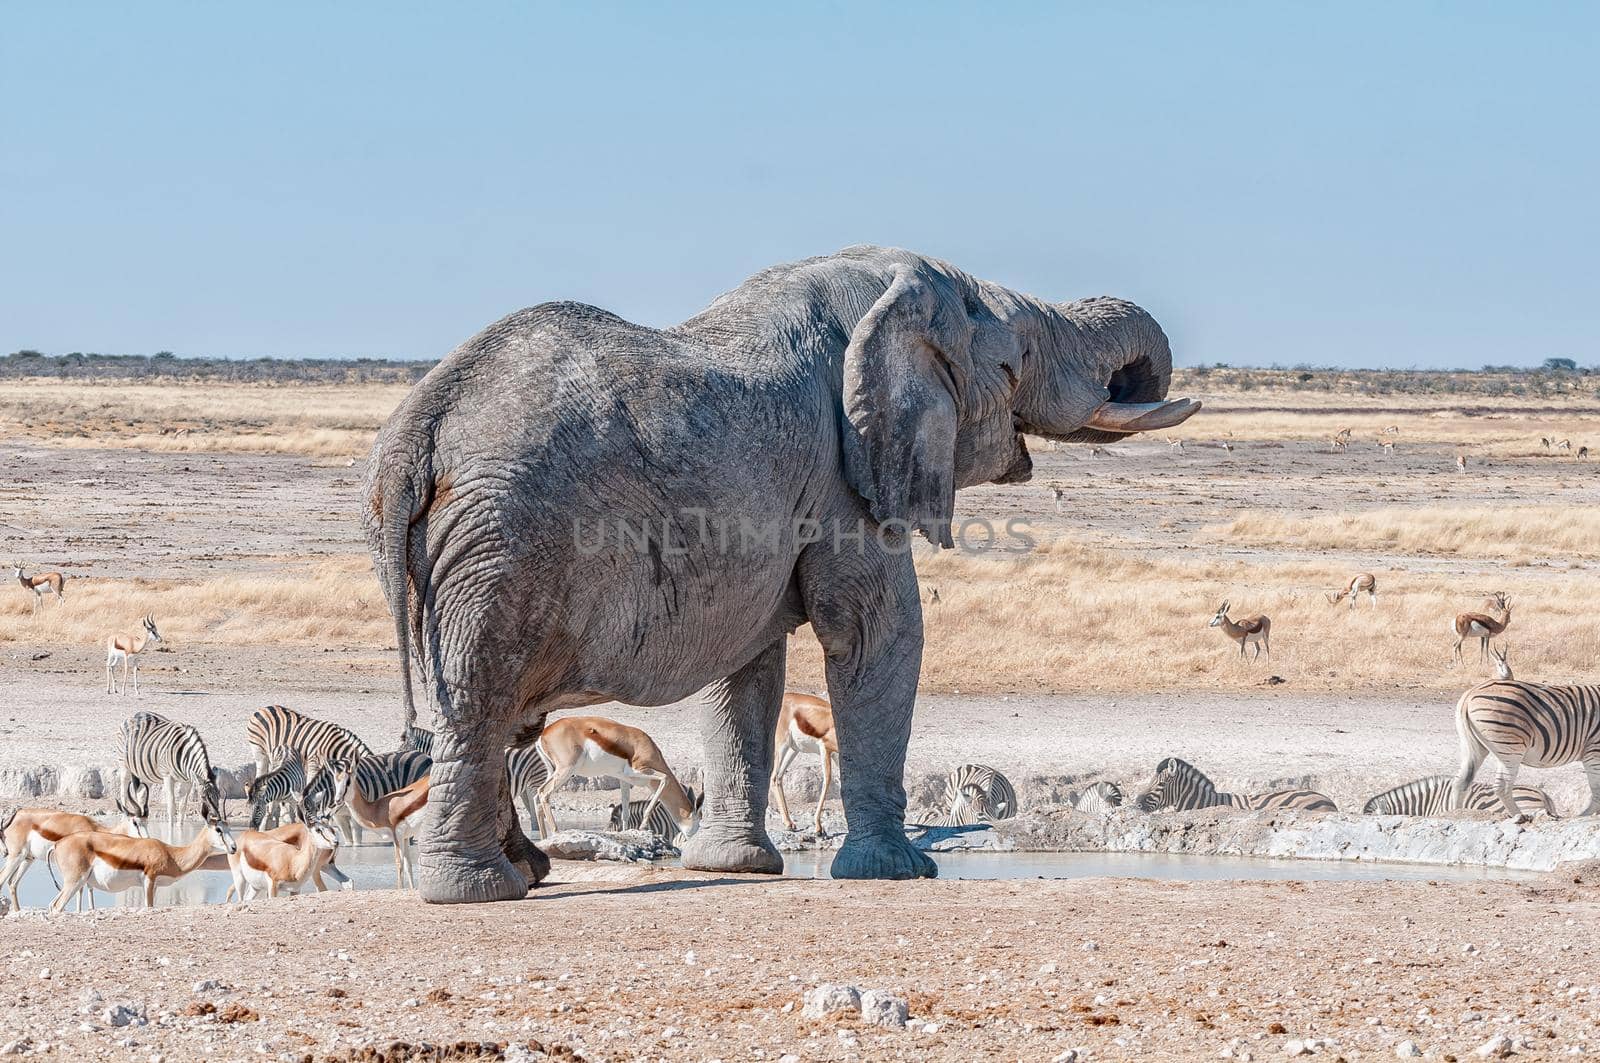 An african elephant drinking water at the Nebrownii waterhole in northern Namibia. Burchells zebras and springbok are visible